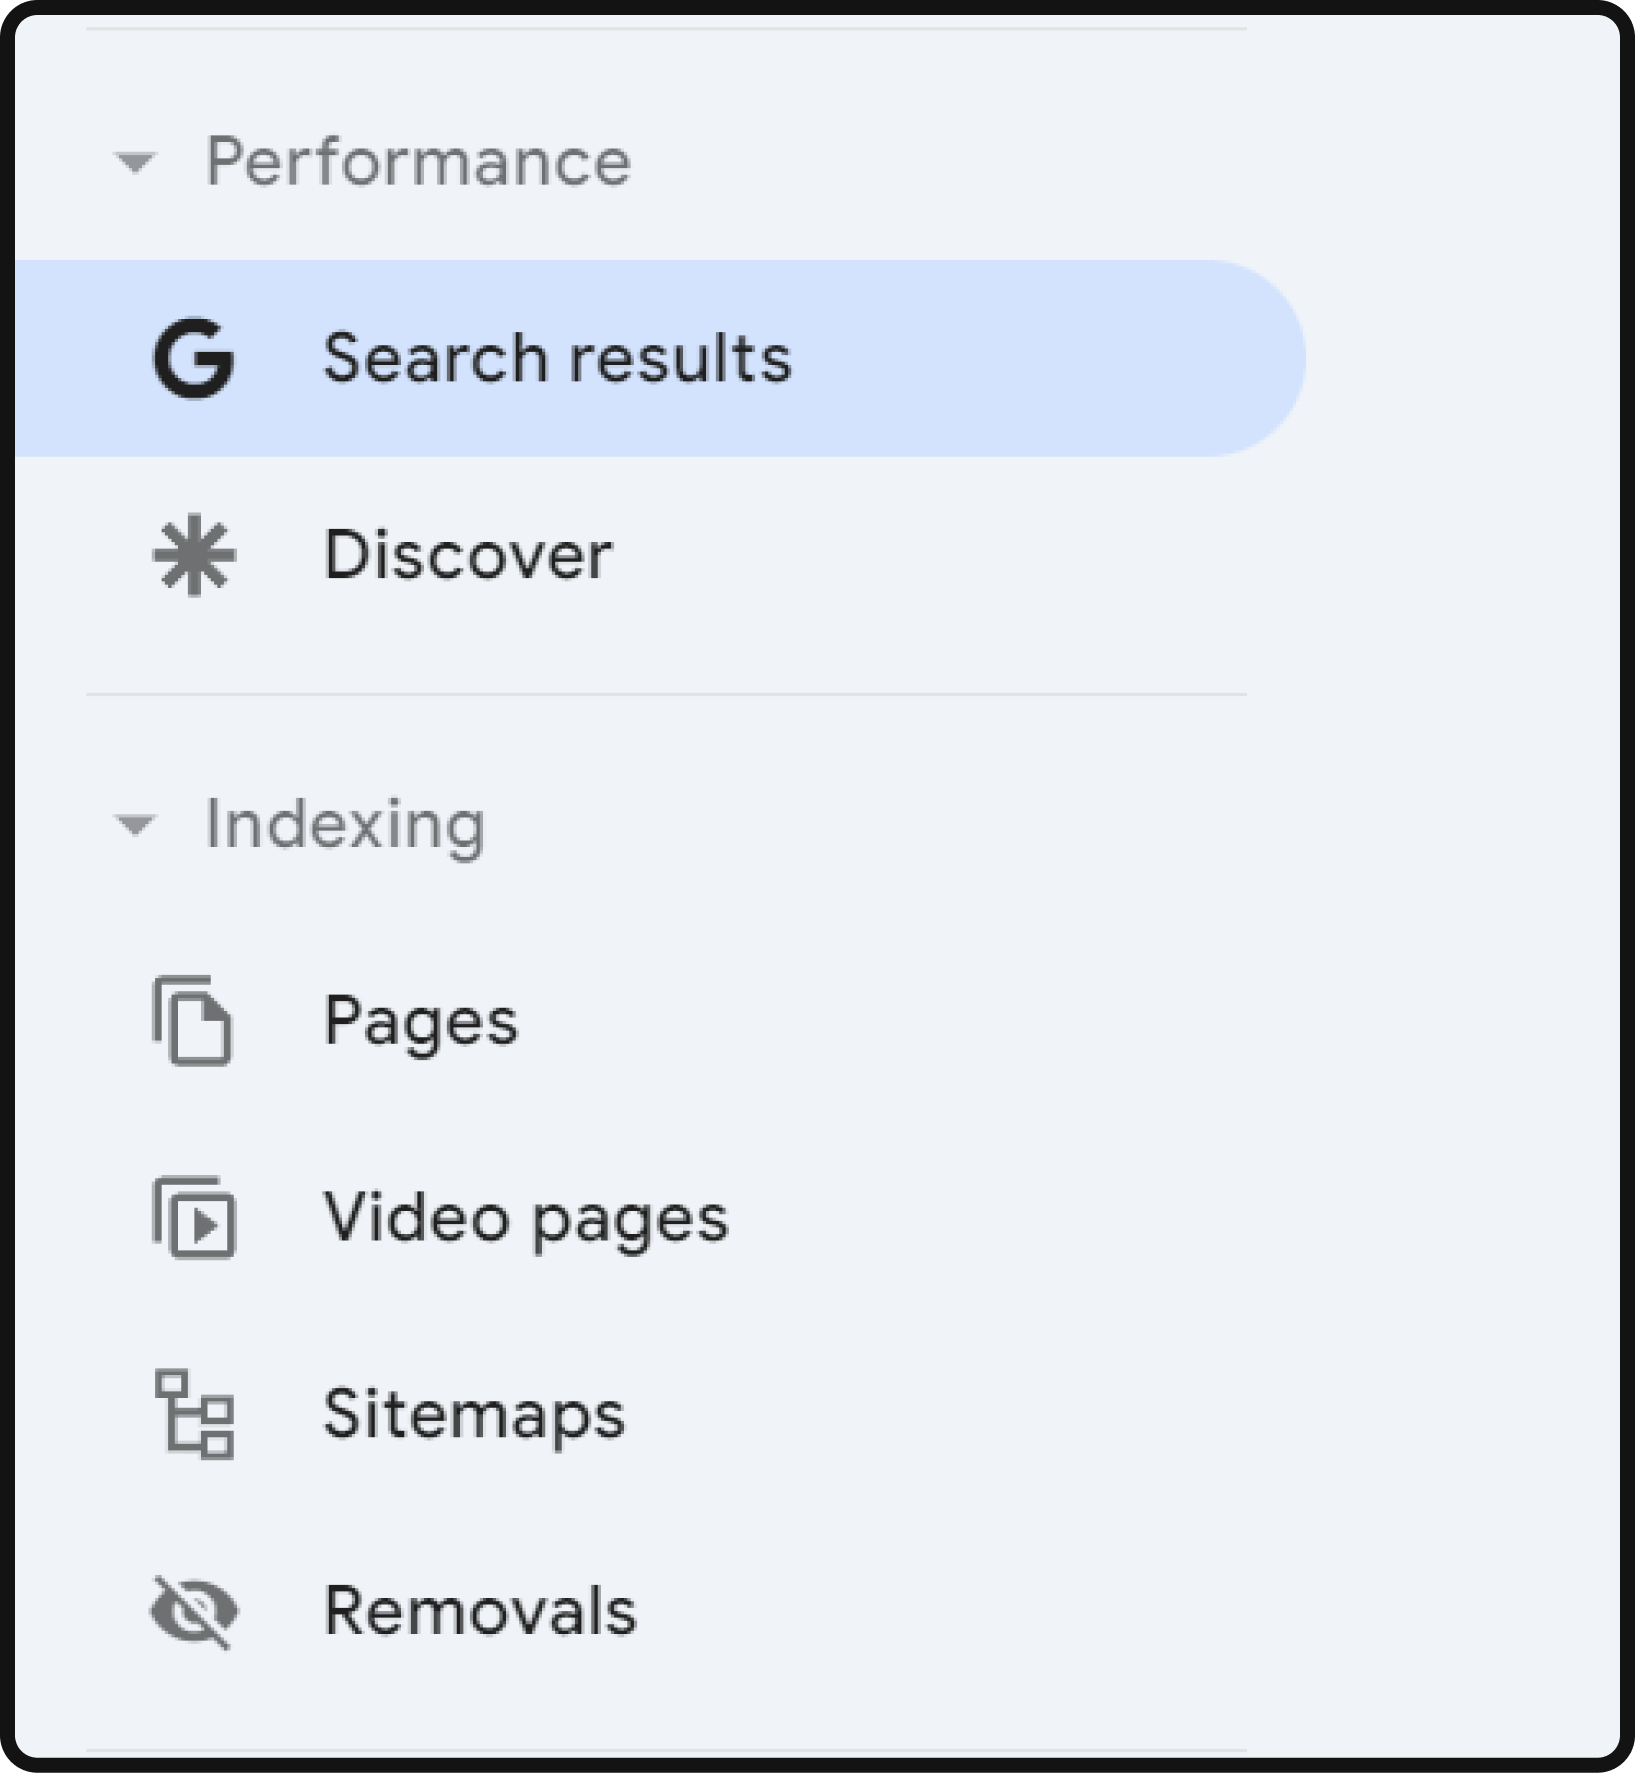 GSC performance search results